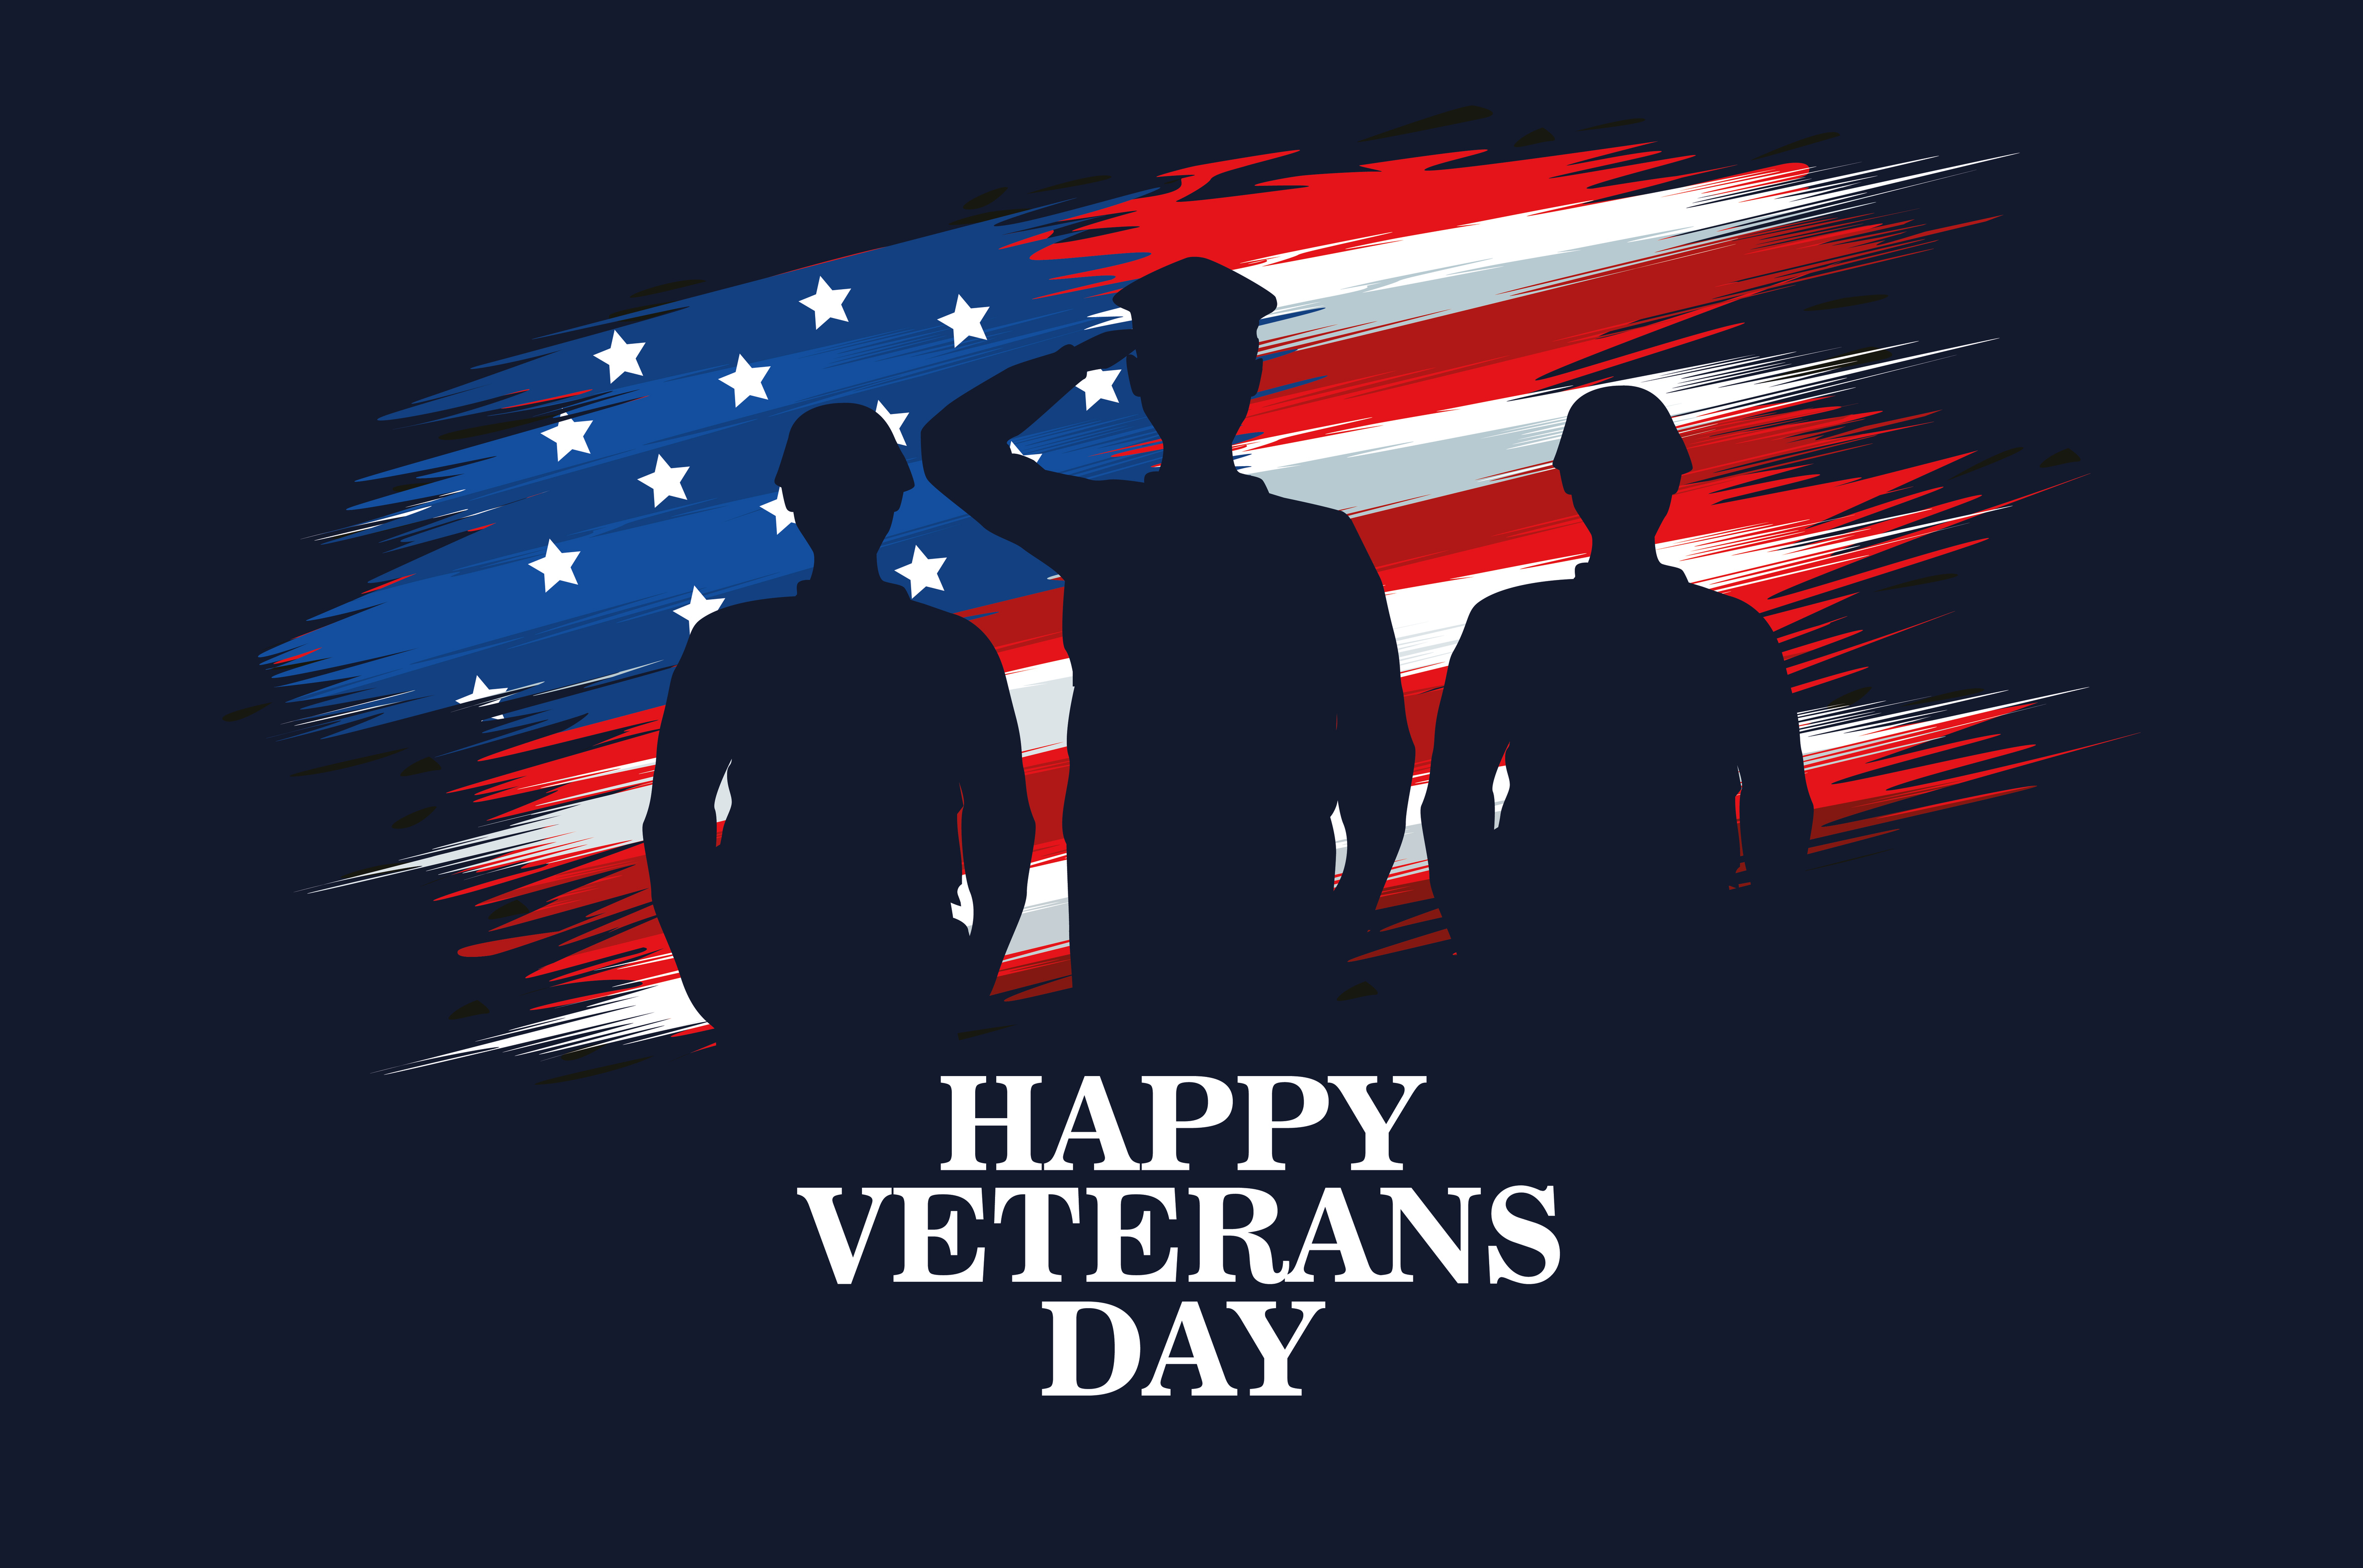 Stylized United States flag in the background with armed service persons silhouettes in the foreground with the caption "Happy Veterans Day"